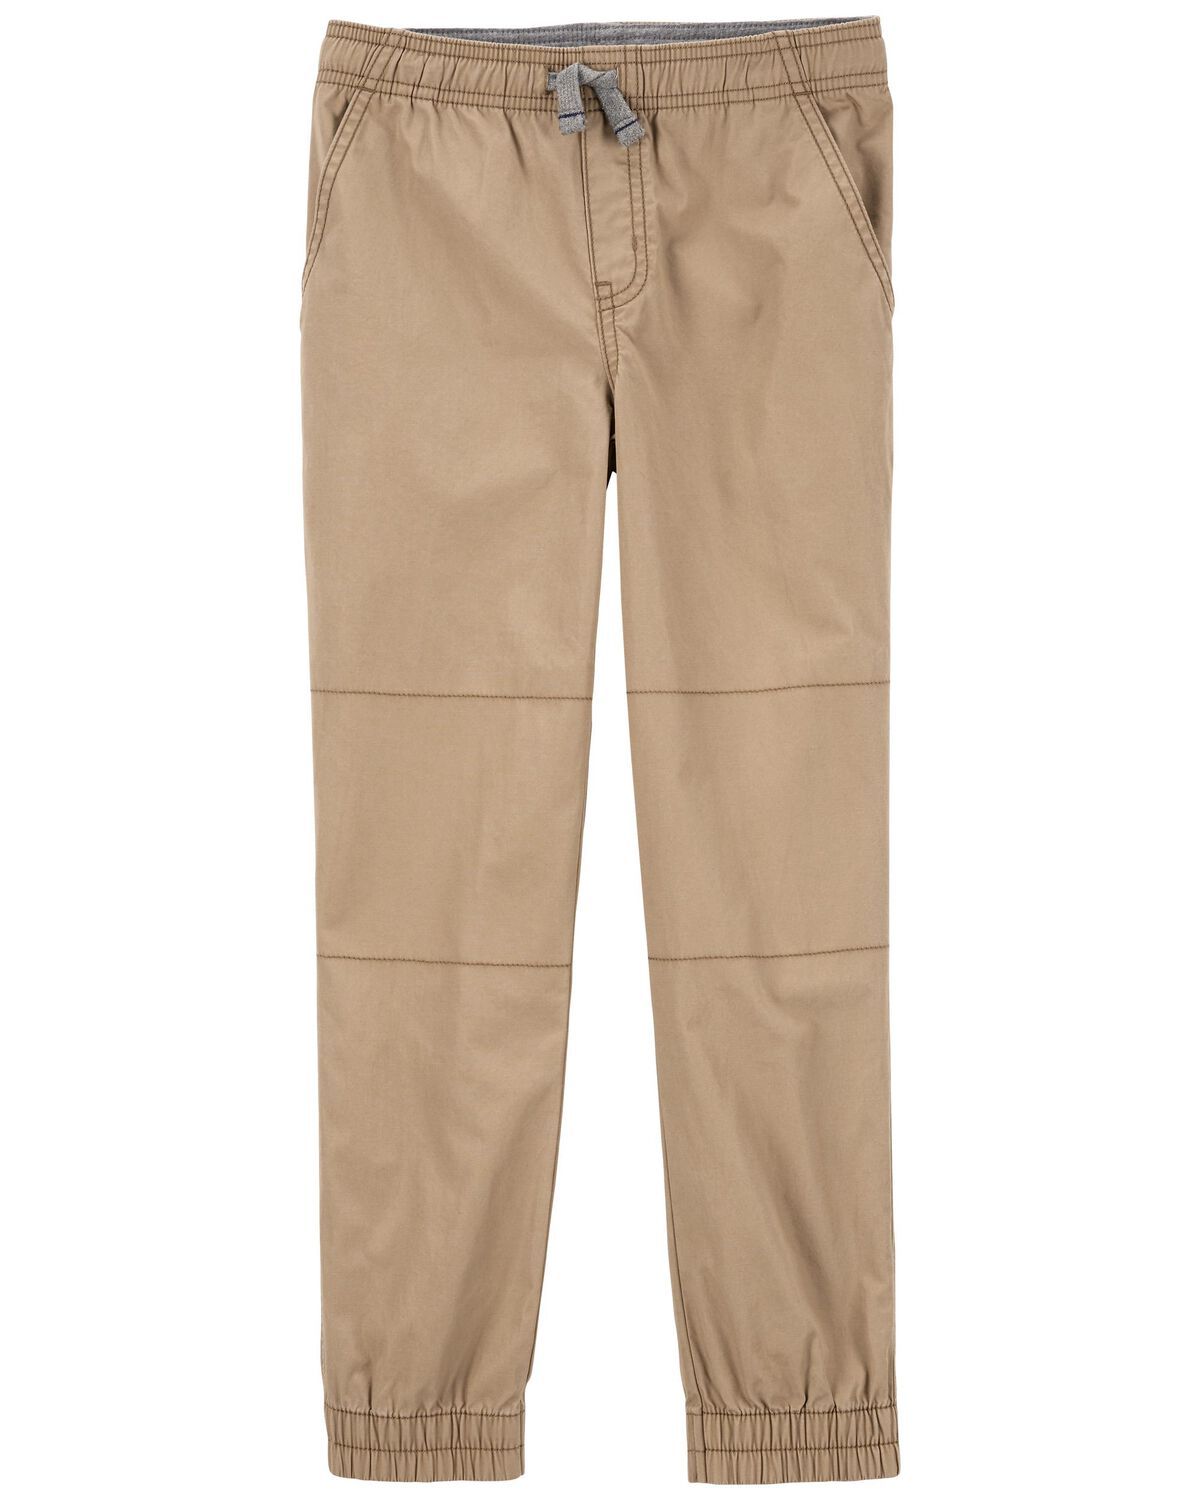 Kid Everyday Pull-On Pants | Carter's